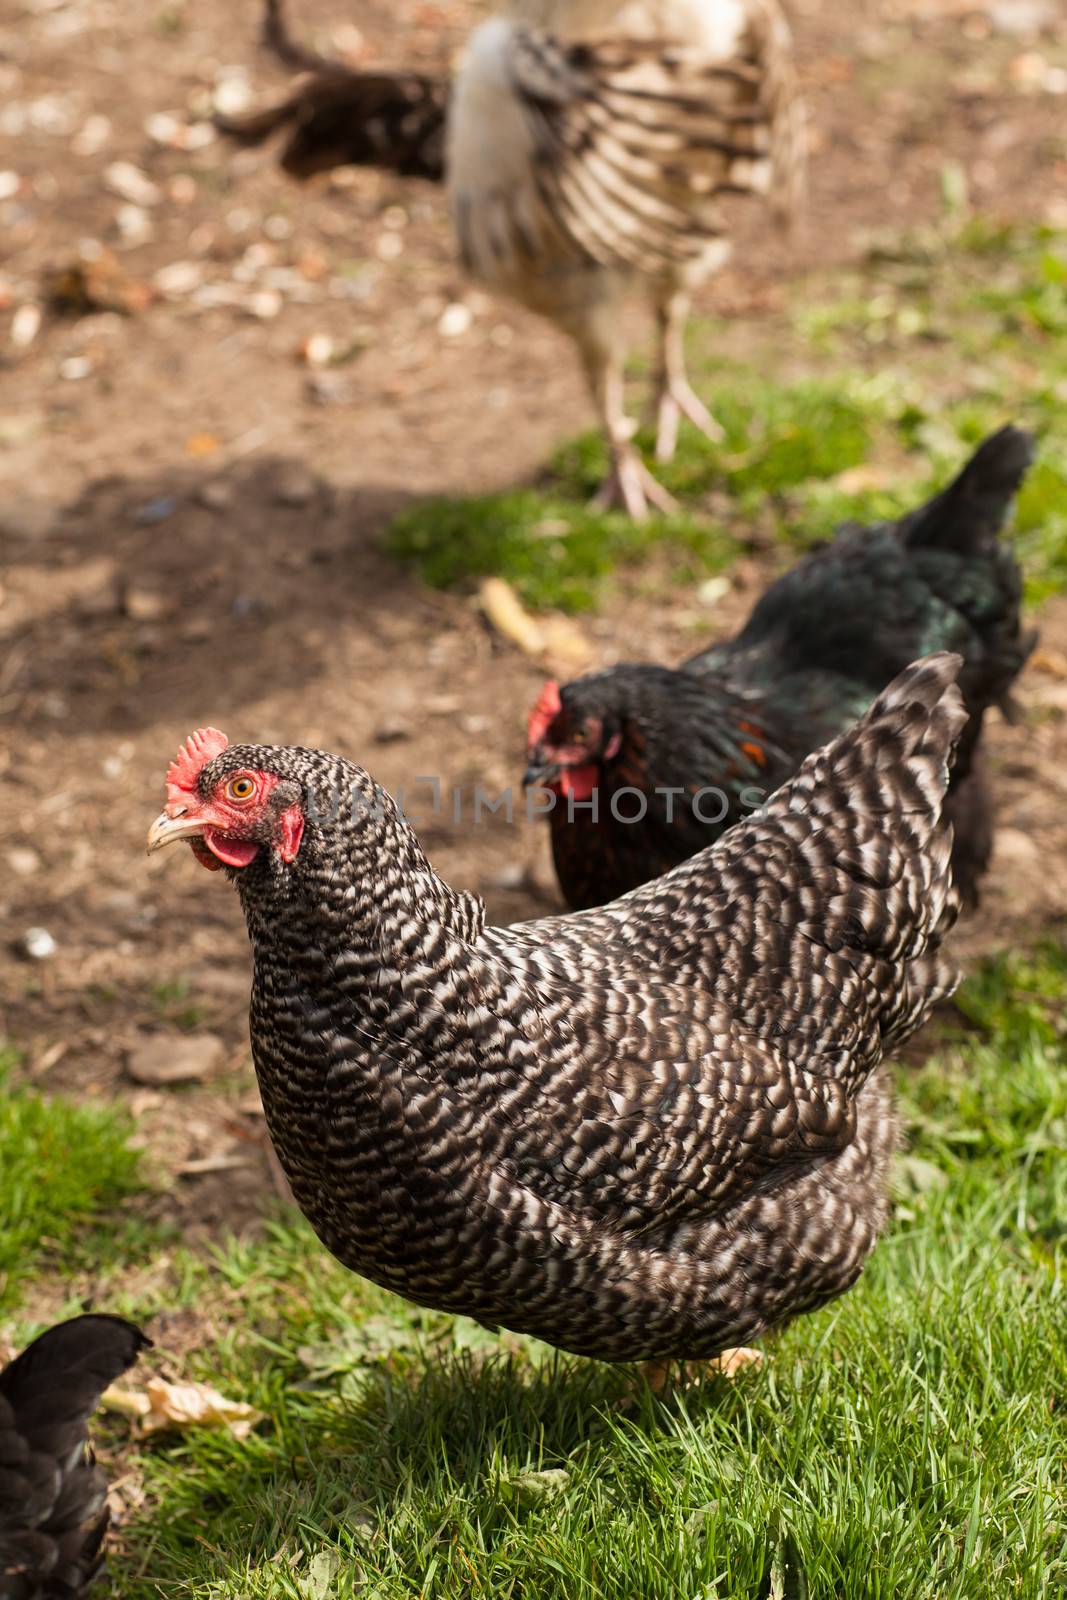 Big hens walking in the grass